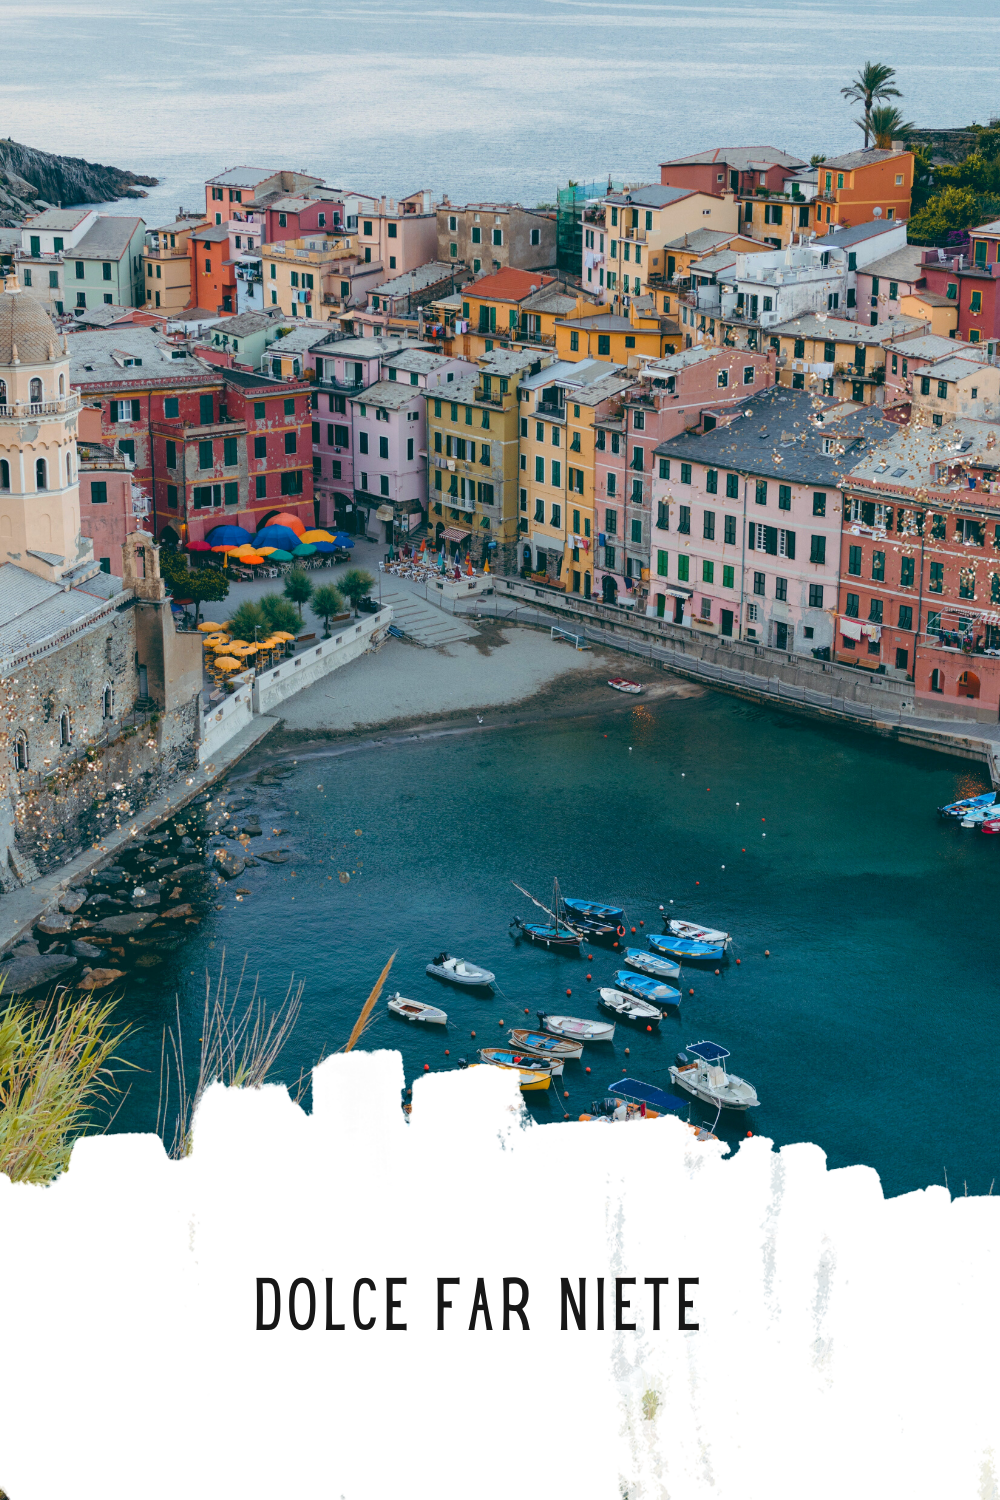 80+ Important Italian Key Phrases and Words When Traveling to Italy